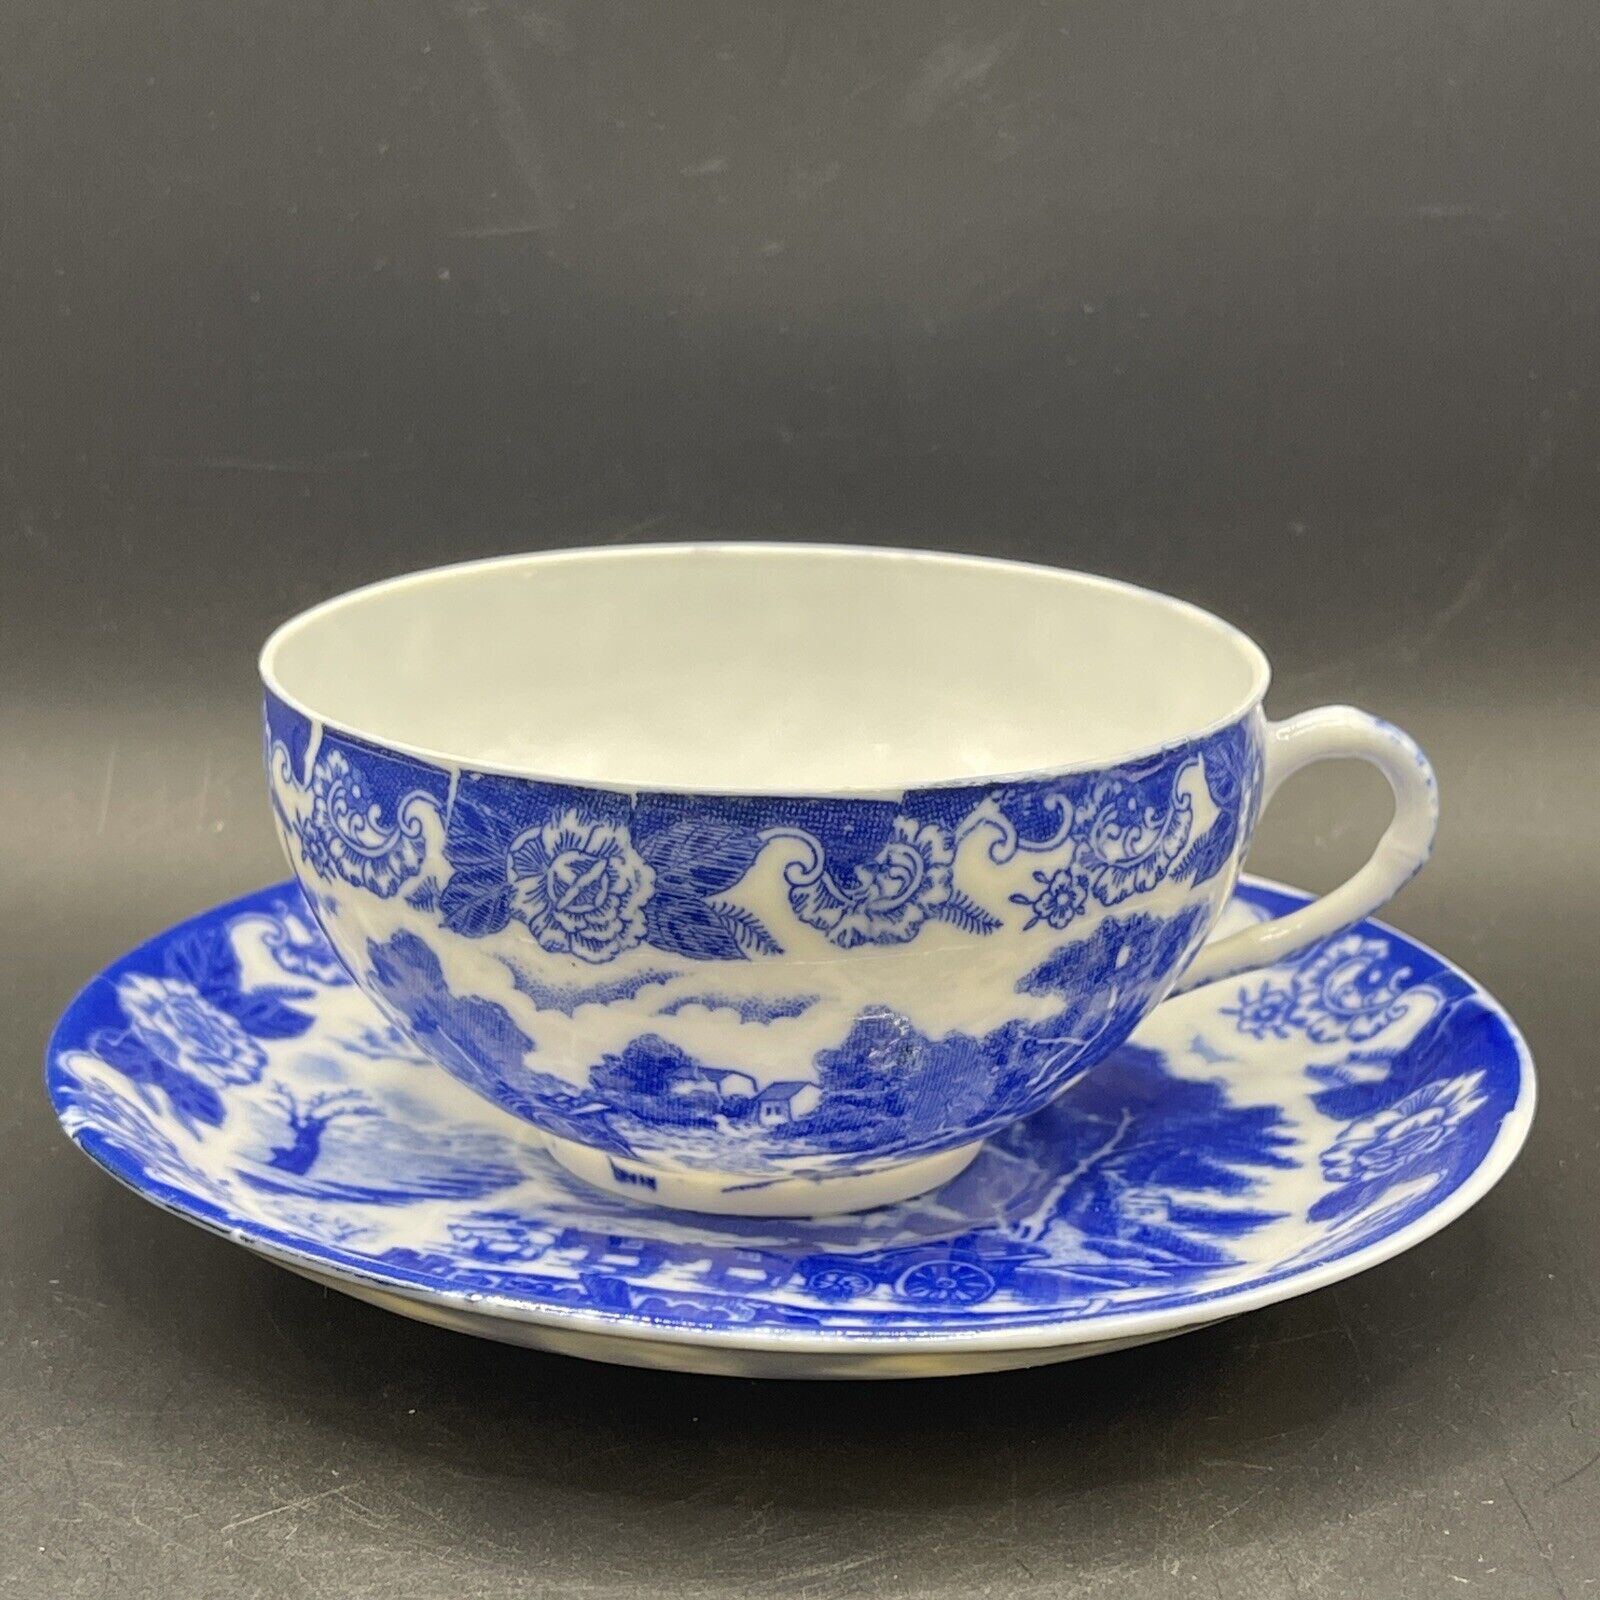 Blue White Egg Shell Porcelain Tea Cup And Saucer Made In Japan